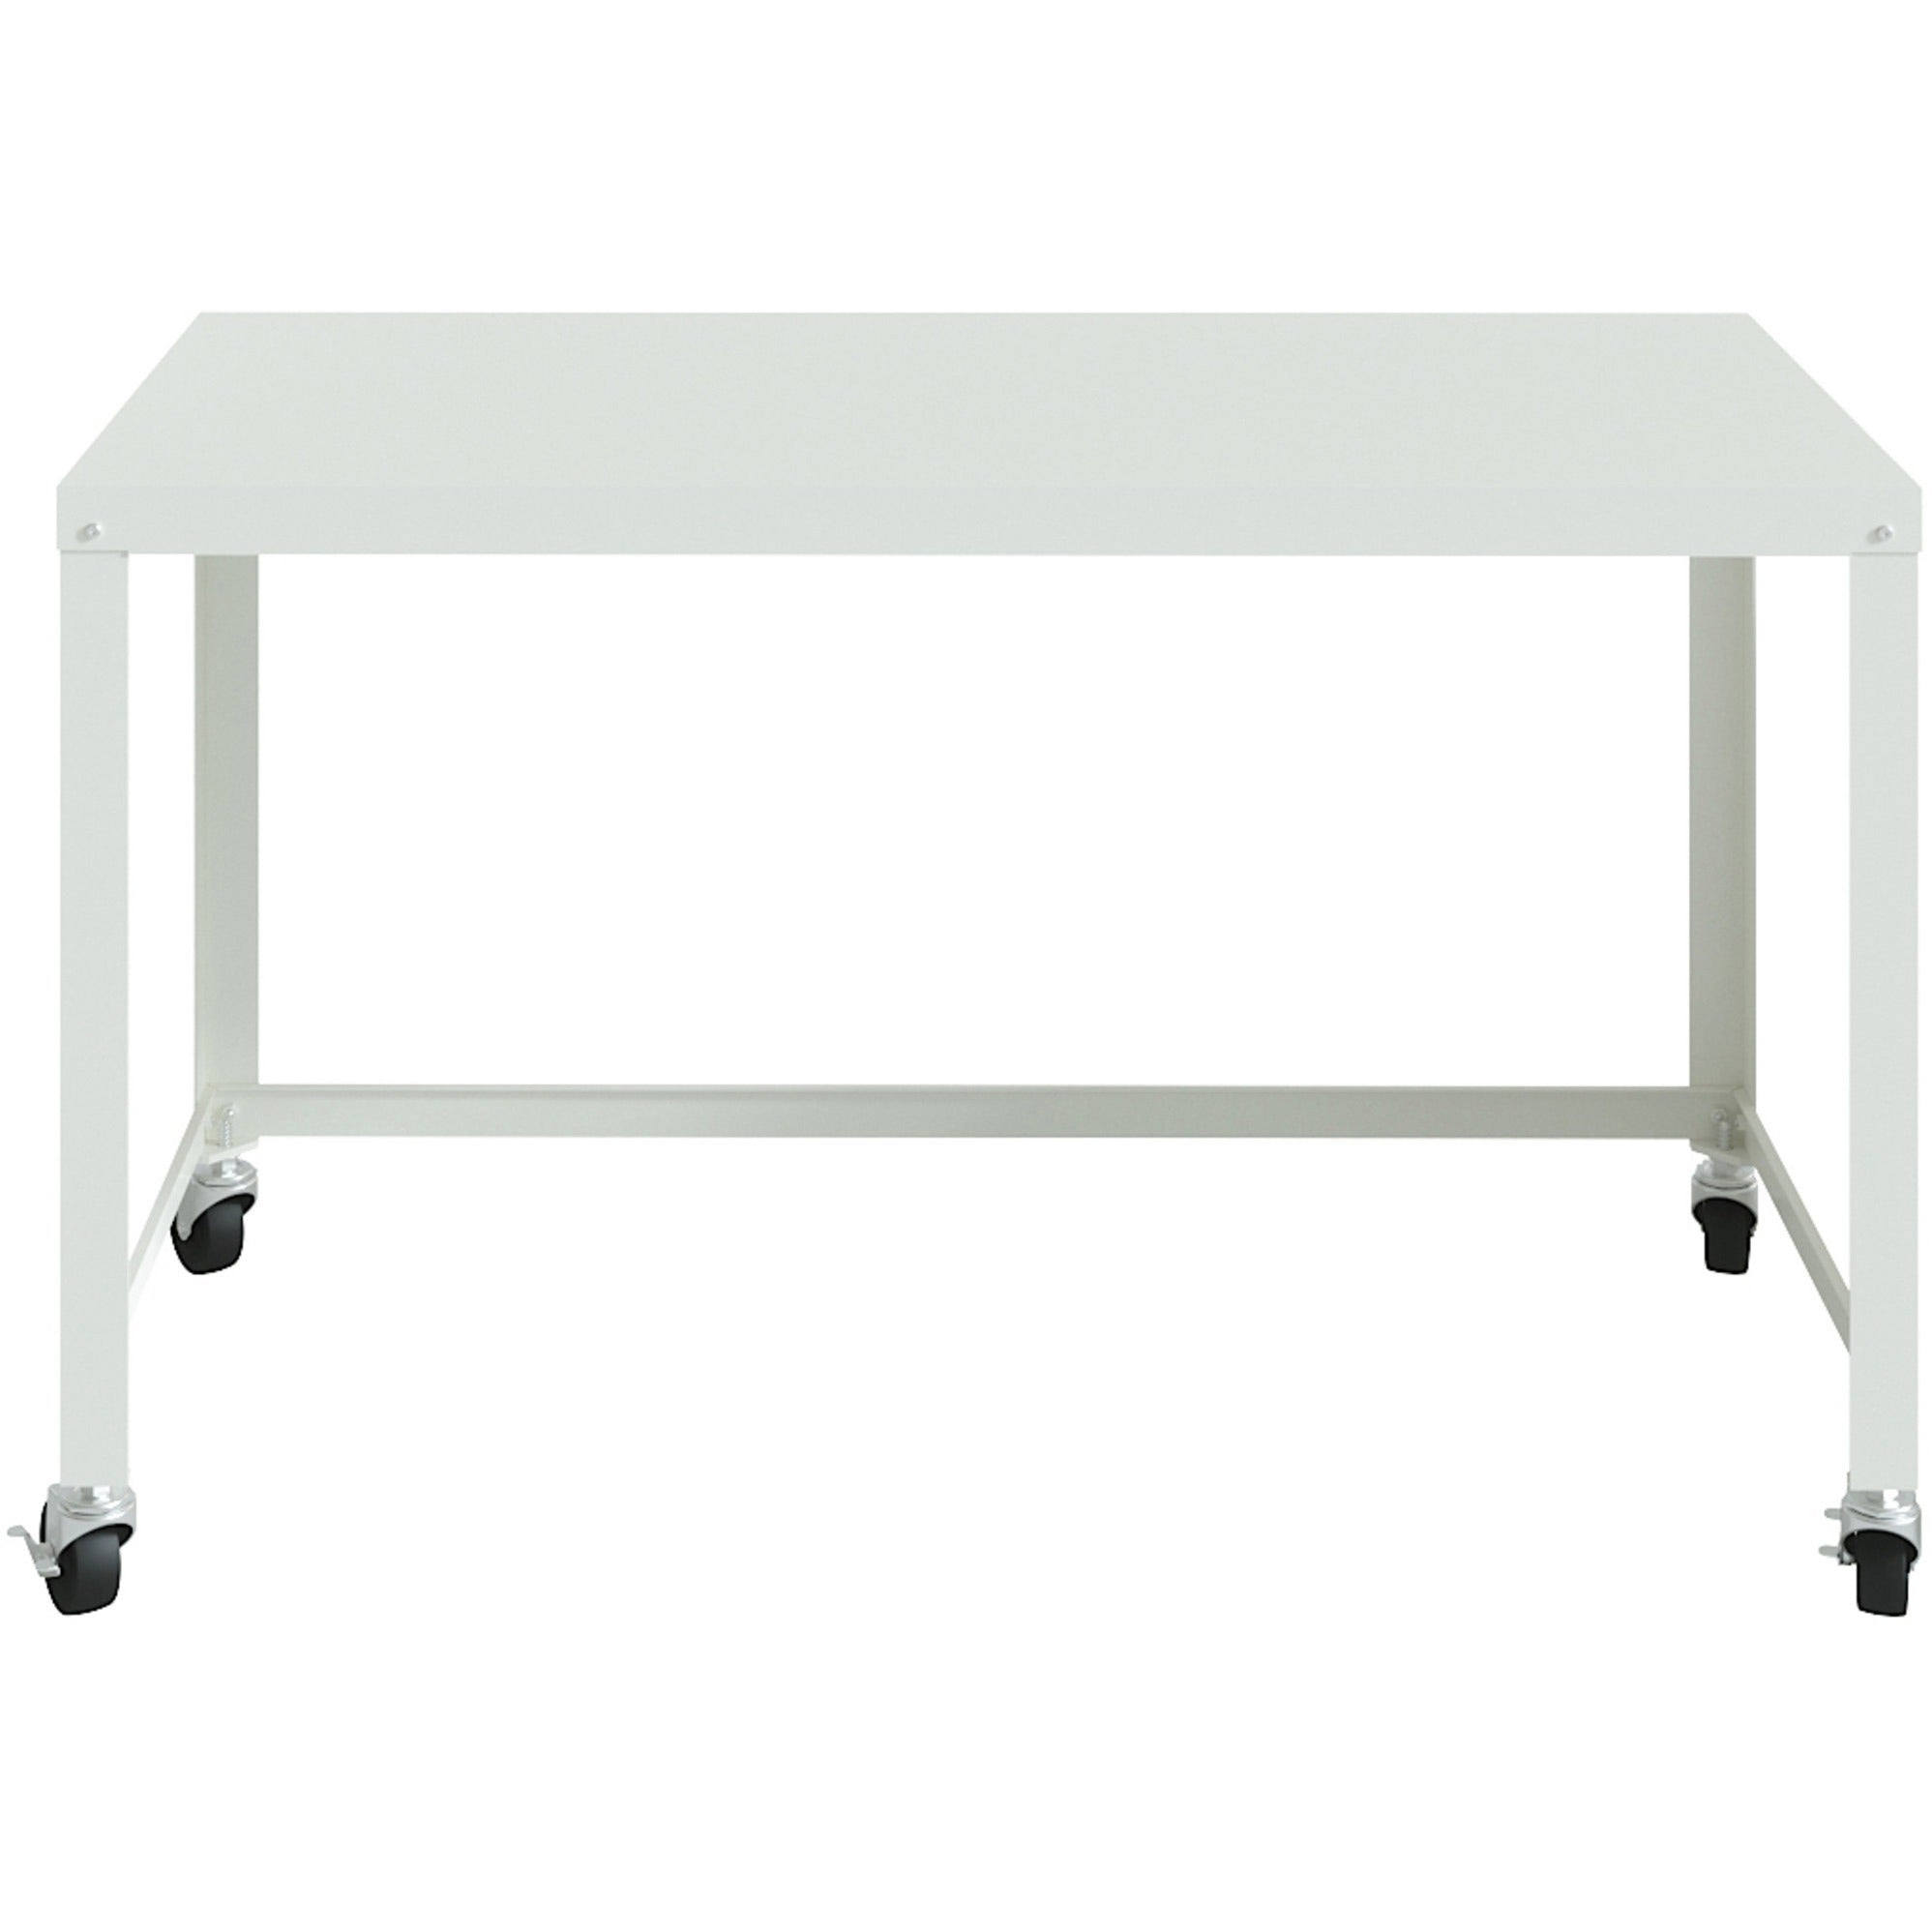 lorell-soho-personal-mobile-desk-for-table-toprectangle-top-x-48-table-top-width-x-23-table-top-depth-2950-height-assembly-required-white-1-each_llr34418 - 2